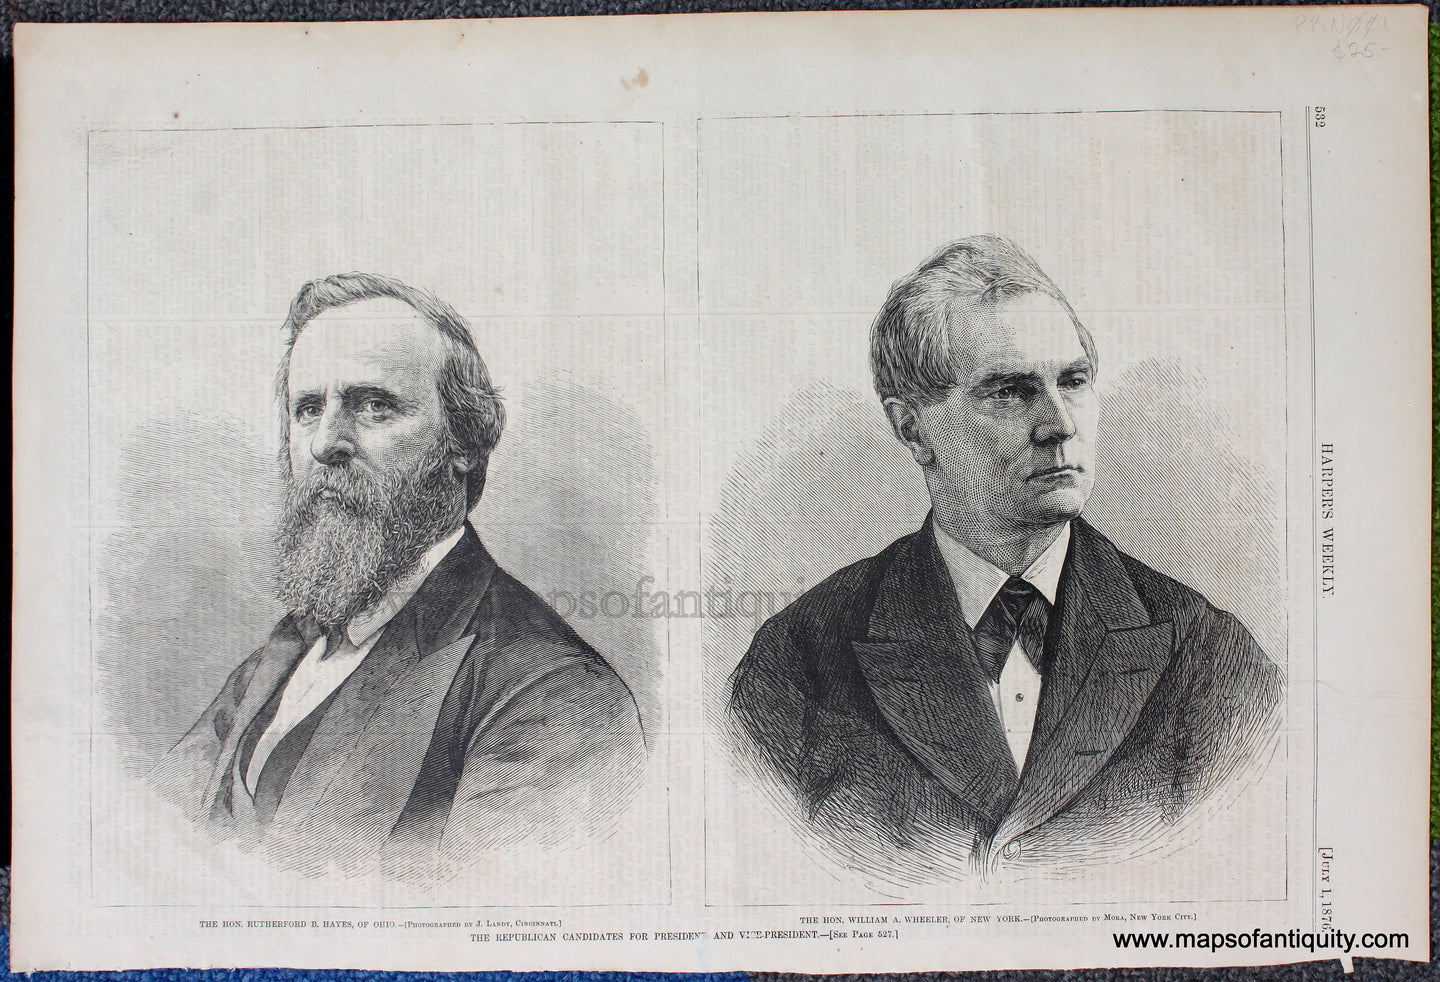 Antique-Black-and-White-Print-The-Republican-Candidates-for-President-and-Vice-President---Rutherford-B-Hayes-and-William-A-Wheeler-Antique-Prints--1876-Harper's-Weekly-Maps-Of-Antiquity-1800s-19th-century